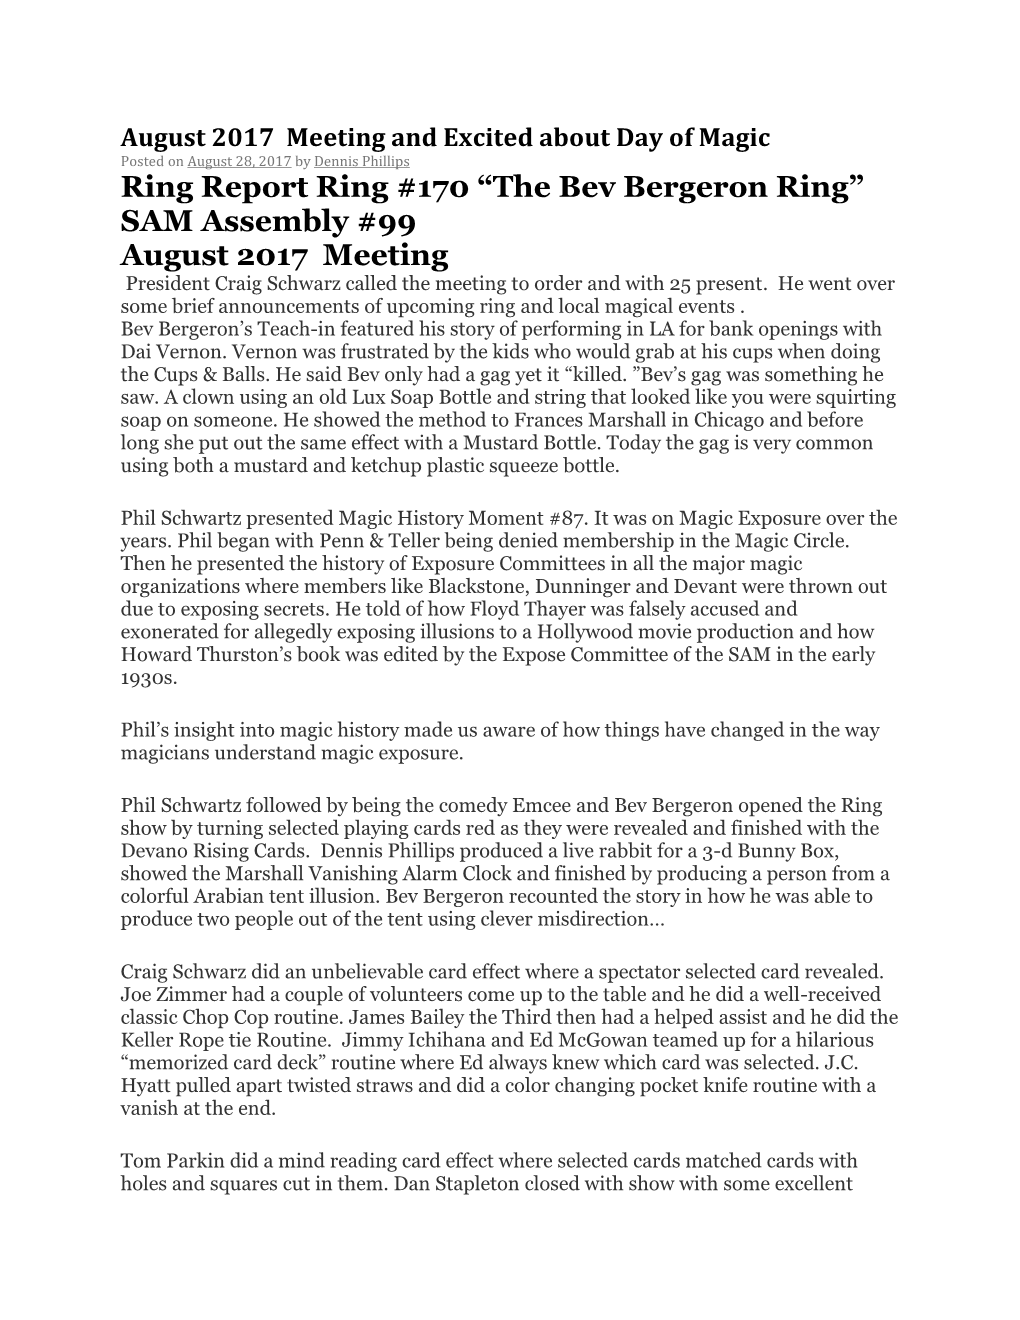 Ring Report Ring #170 “The Bev Bergeron Ring” SAM Assembly #99 August 2017 Meeting President Craig Schwarz Called the Meeting to Order and with 25 Present